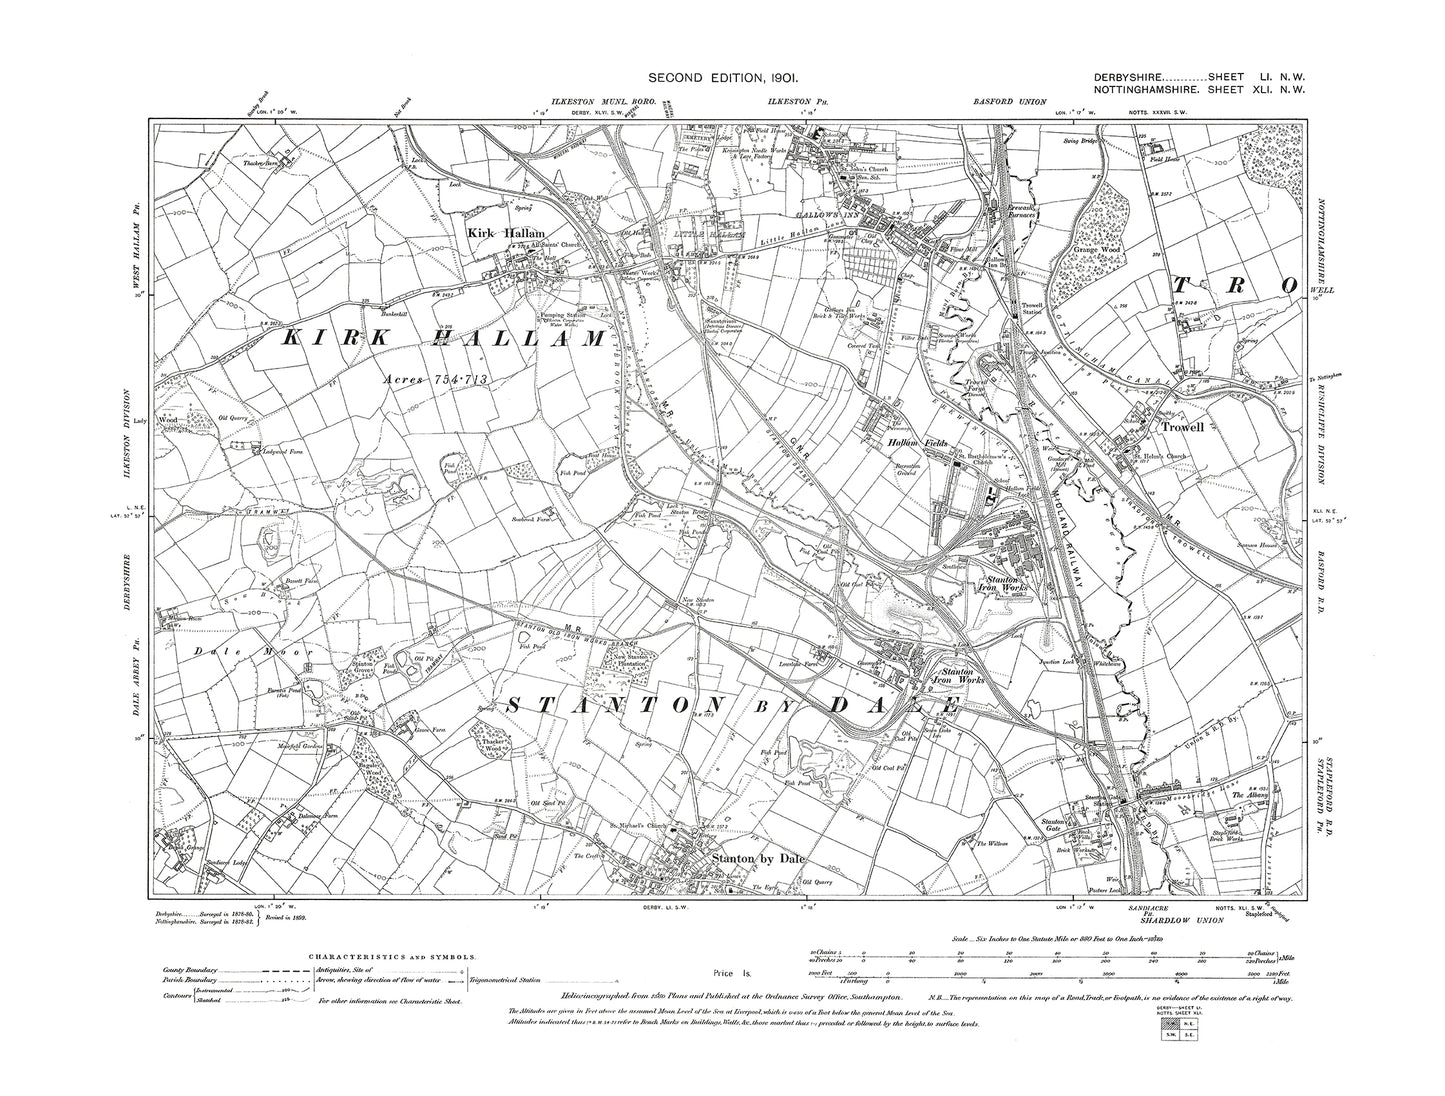 Old OS map dated 1901, showing Stanton by Dale (north) in Derbyshire 51NW